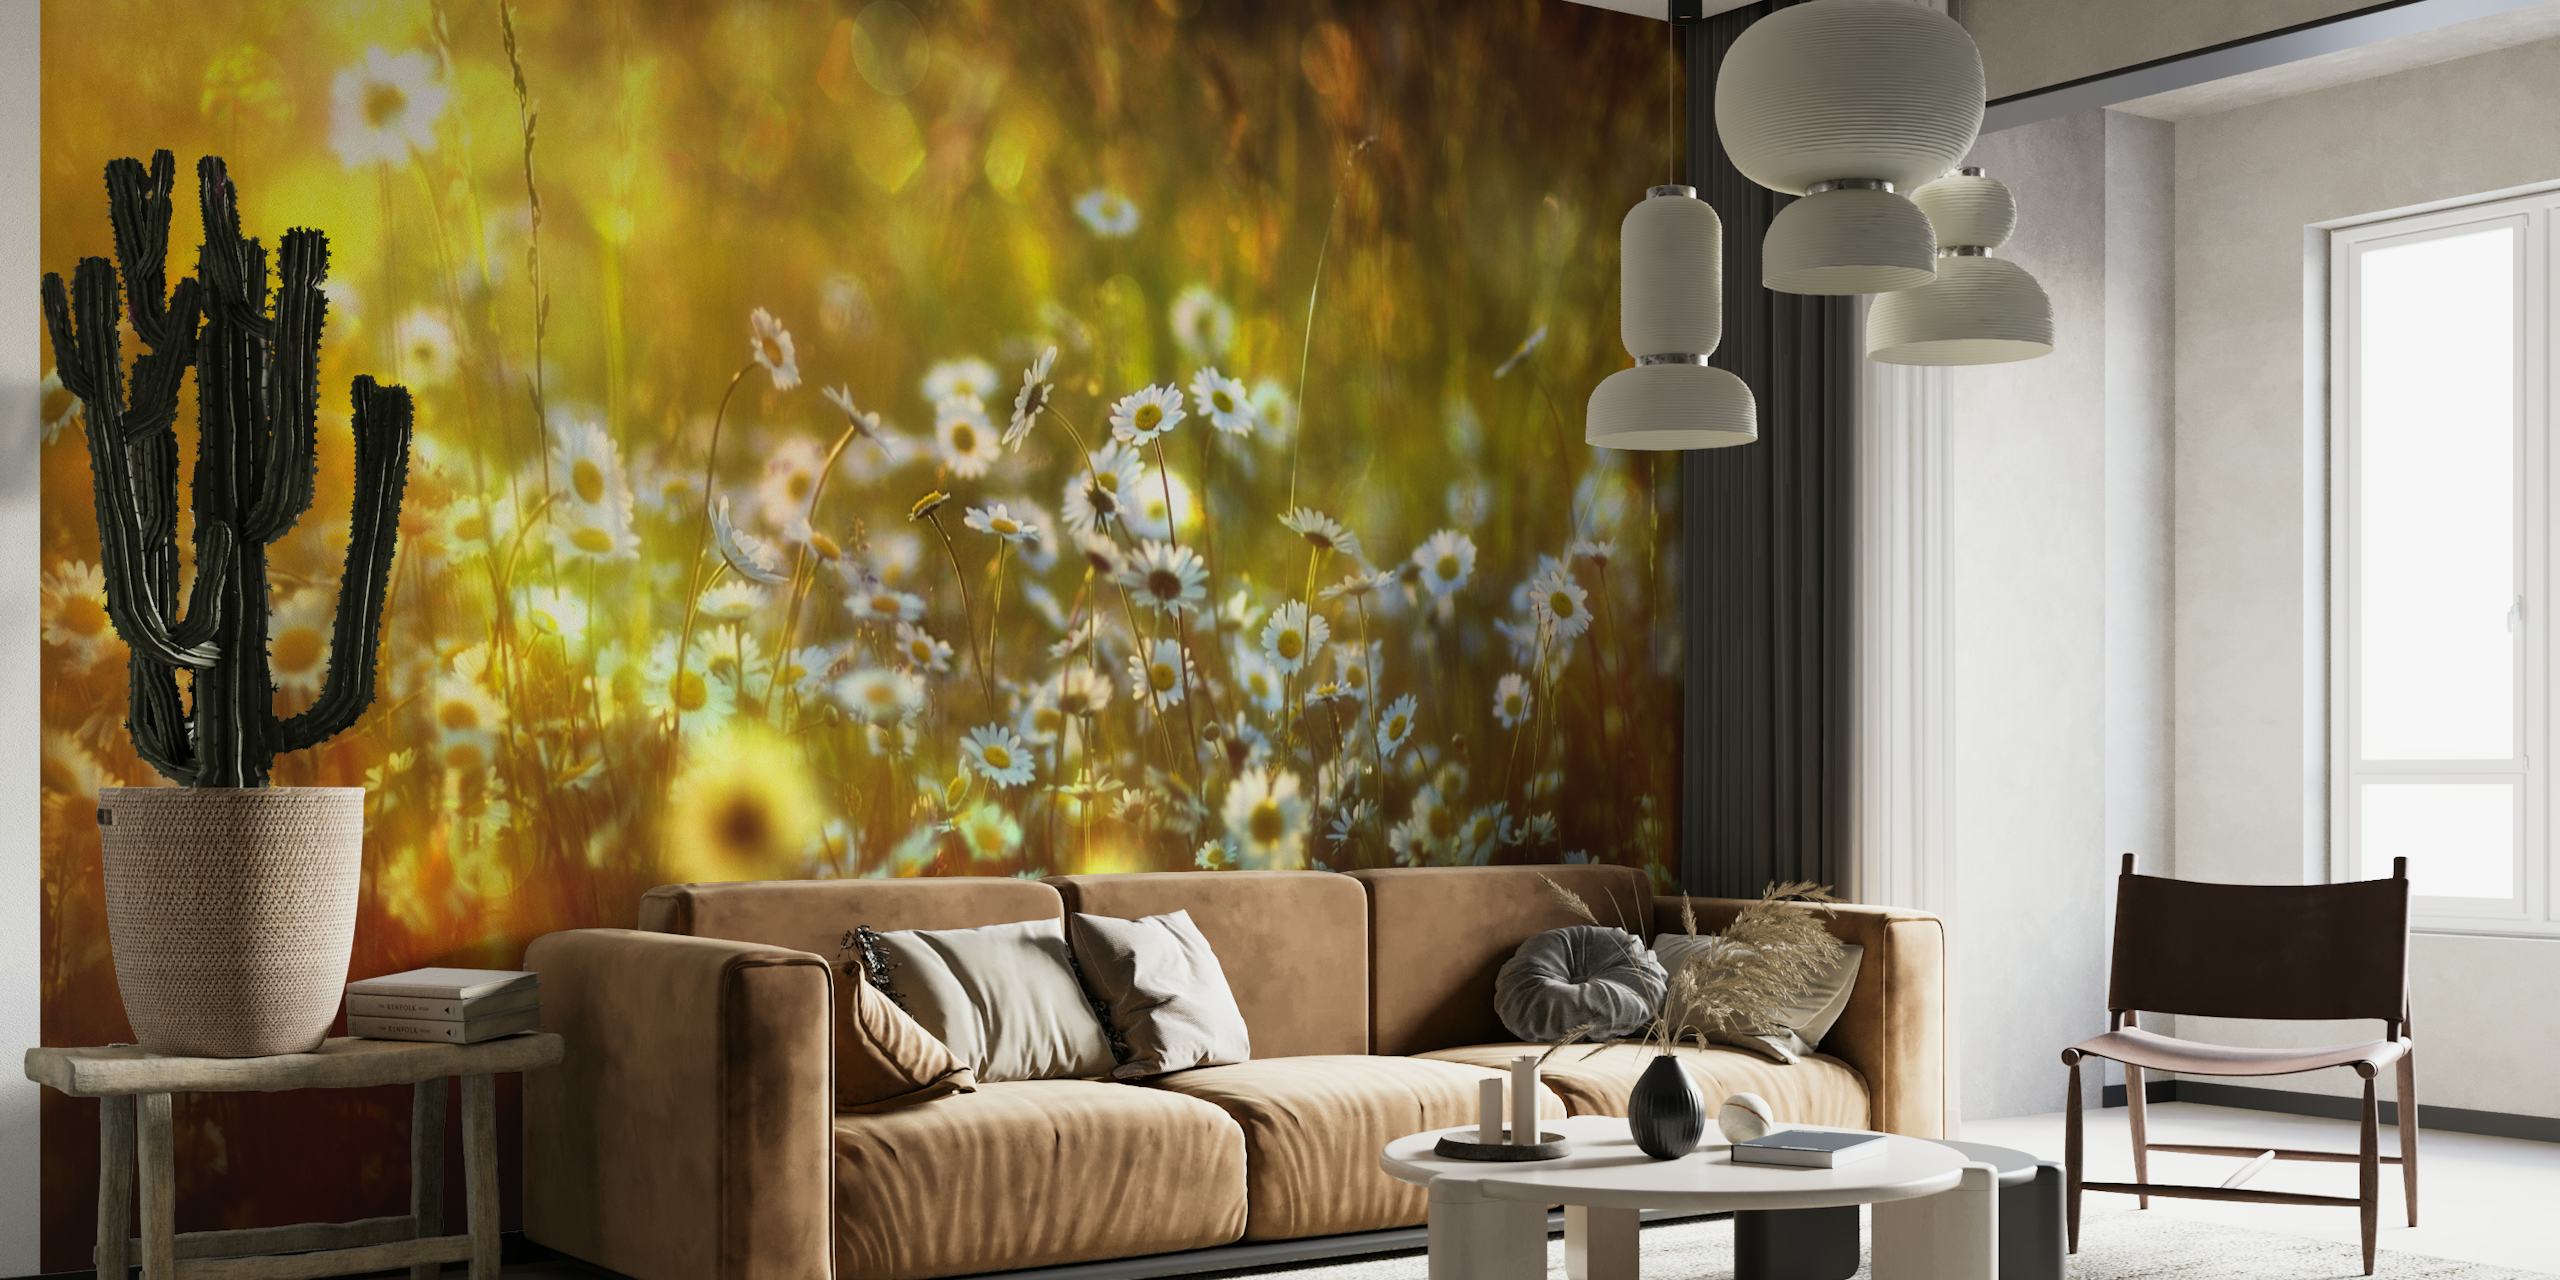 Wonderland wall mural of a magical, sunlit forest with glittering flora details